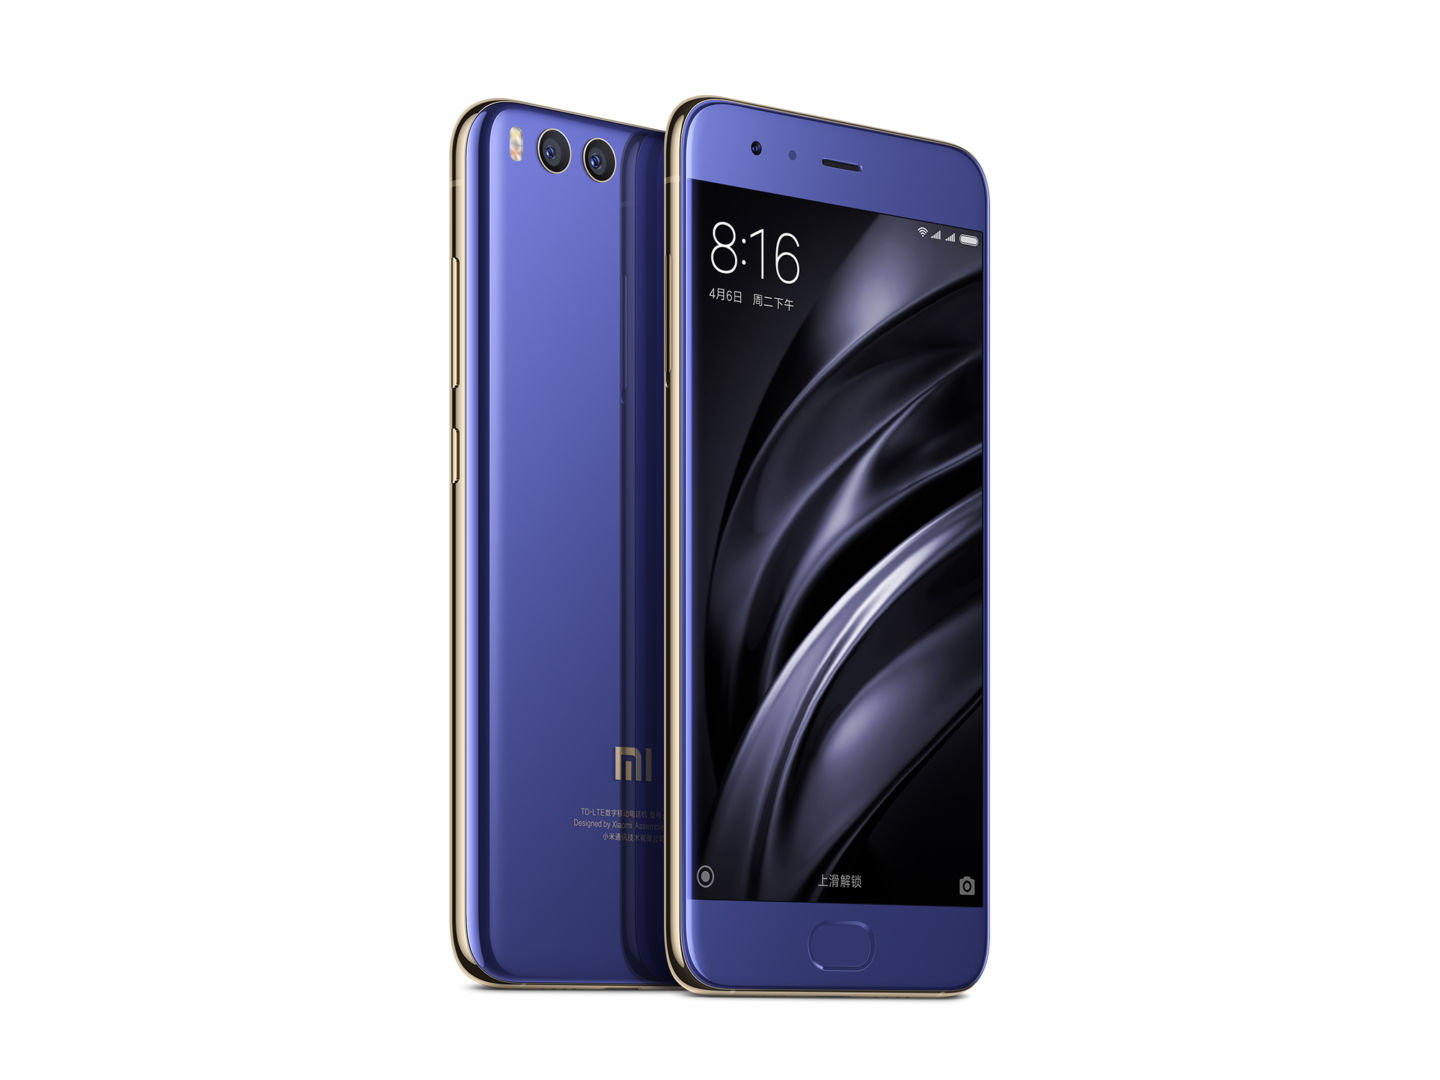 xiaomi mi 6 will be up for pre-orders on 28th april